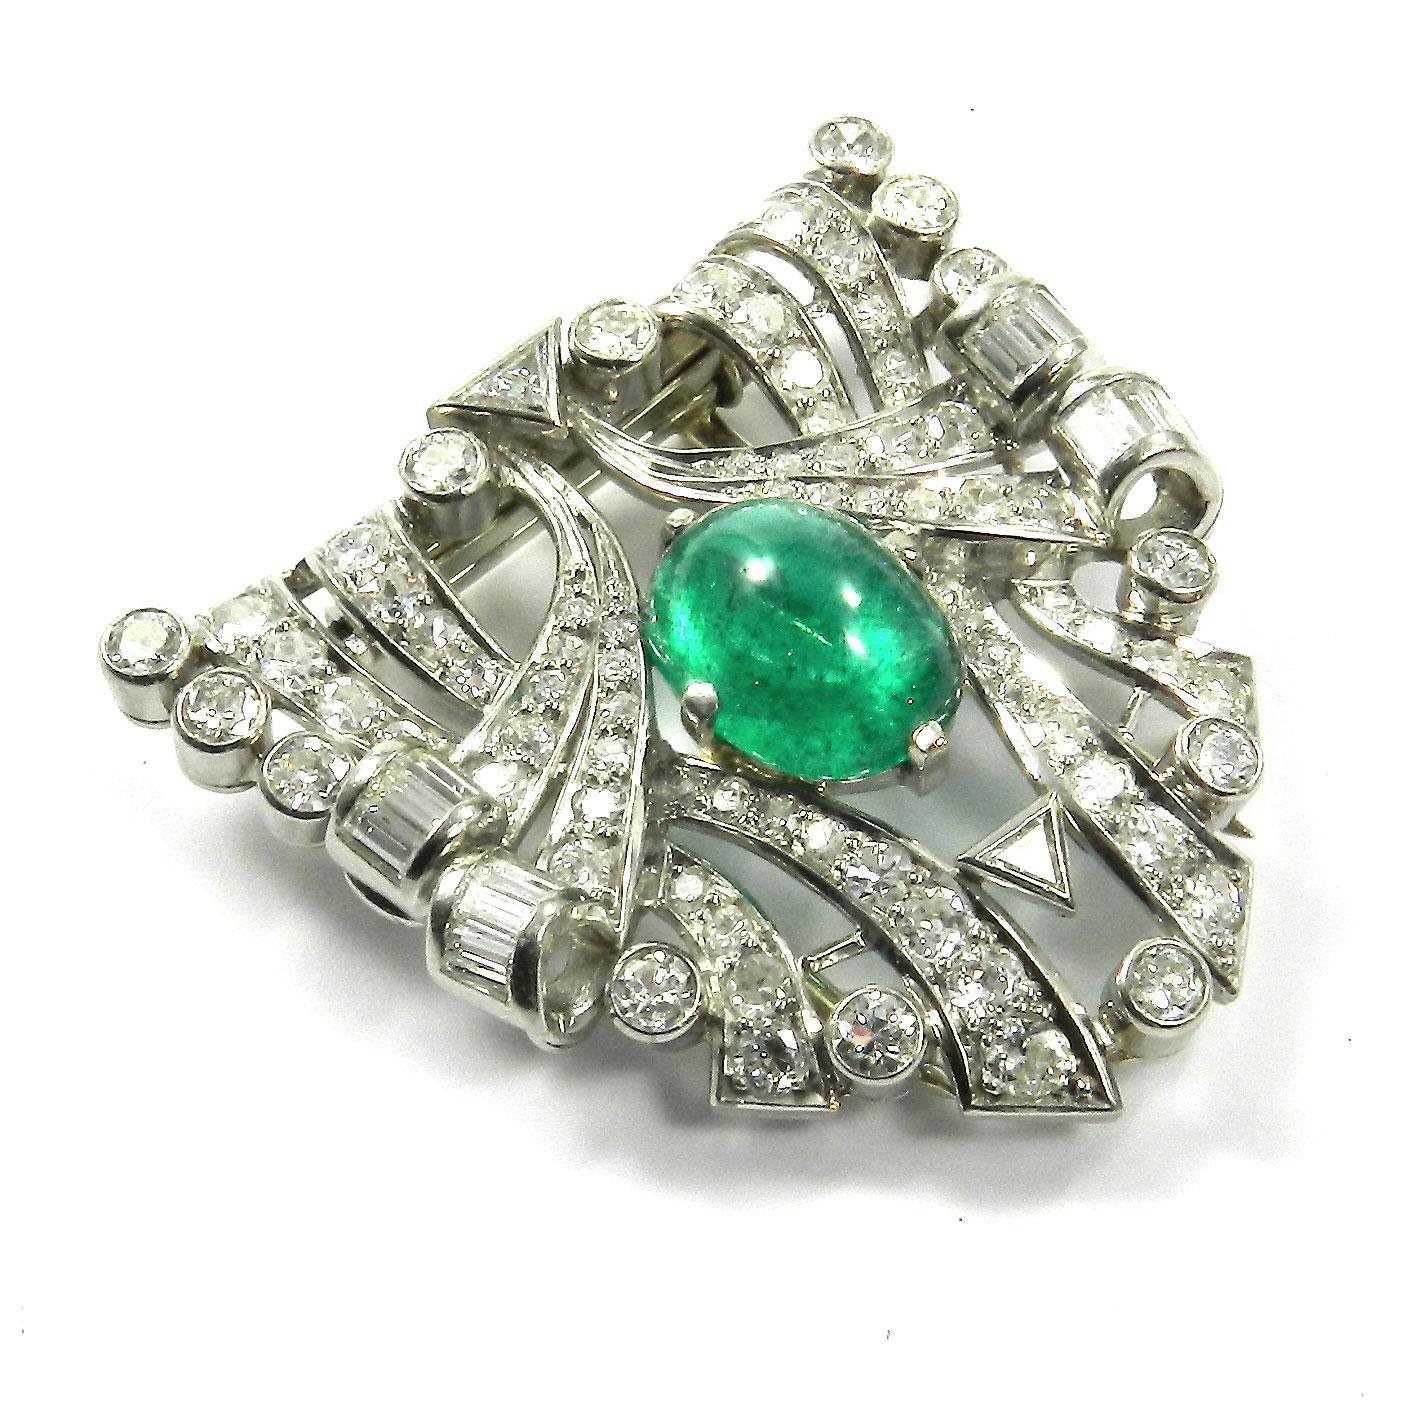 4.4 carat emerald and diamond clip Brooch in 18K White Gold

This magnificent, geometrically openwork clip brooch has the shape of a shield, set with a central emerald cabochon of 4.4 ct, surrounded by 89 diamonds with a total of 4.3 ct.
 

Platinum